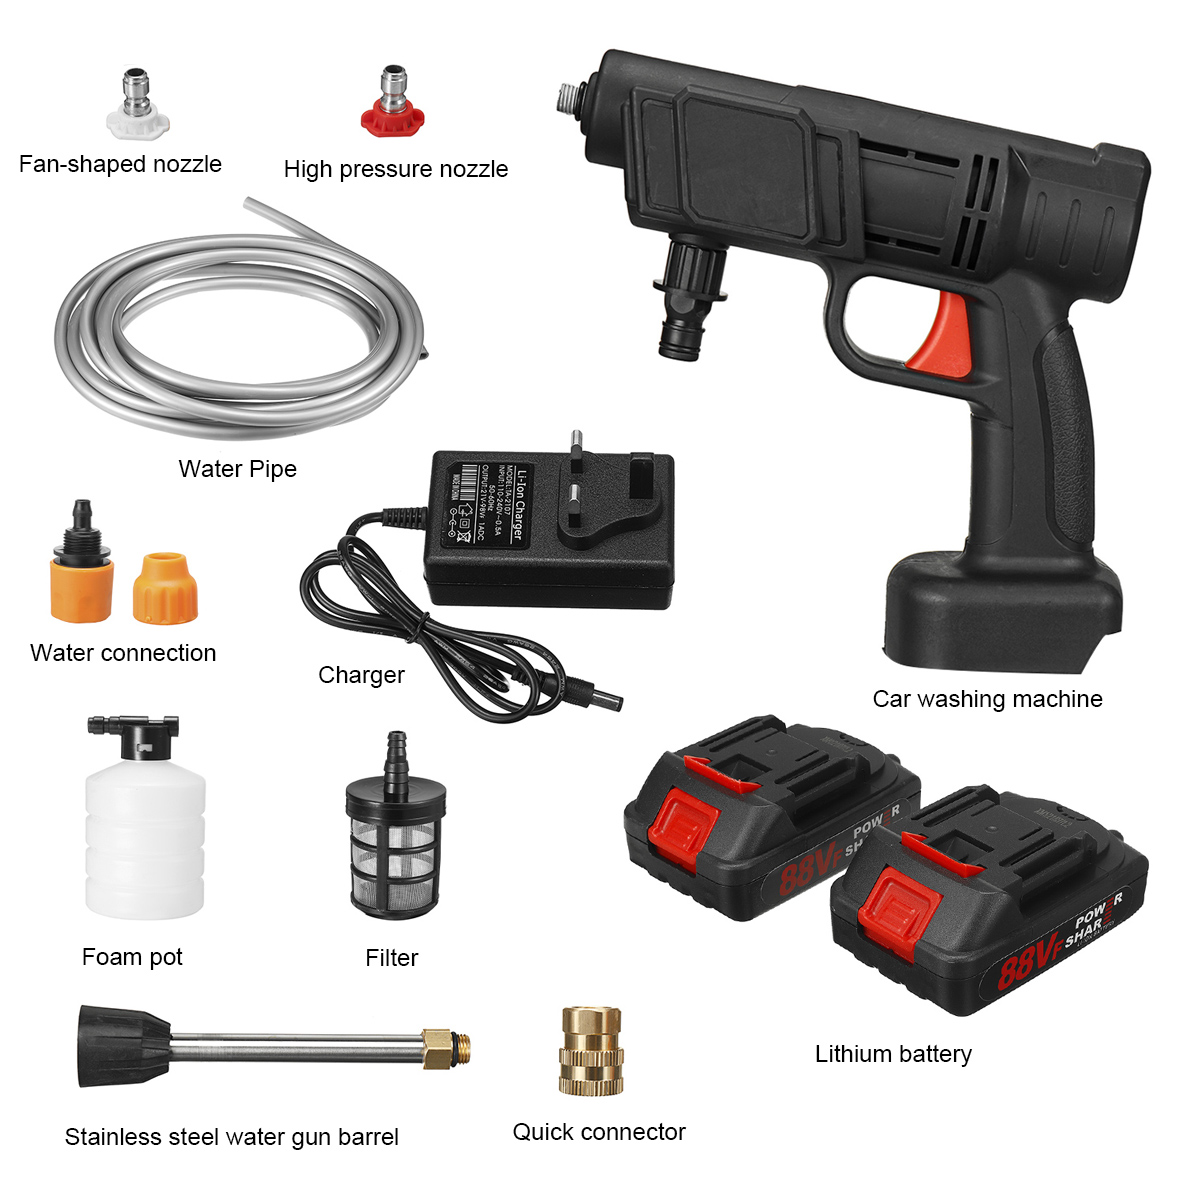 88VF-Cordless-High-Pressure-Washer-Car-Washing-Machine-Water-Spayer-Guns-Vehicle-Cleaning-Tool-W-Non-1867531-4